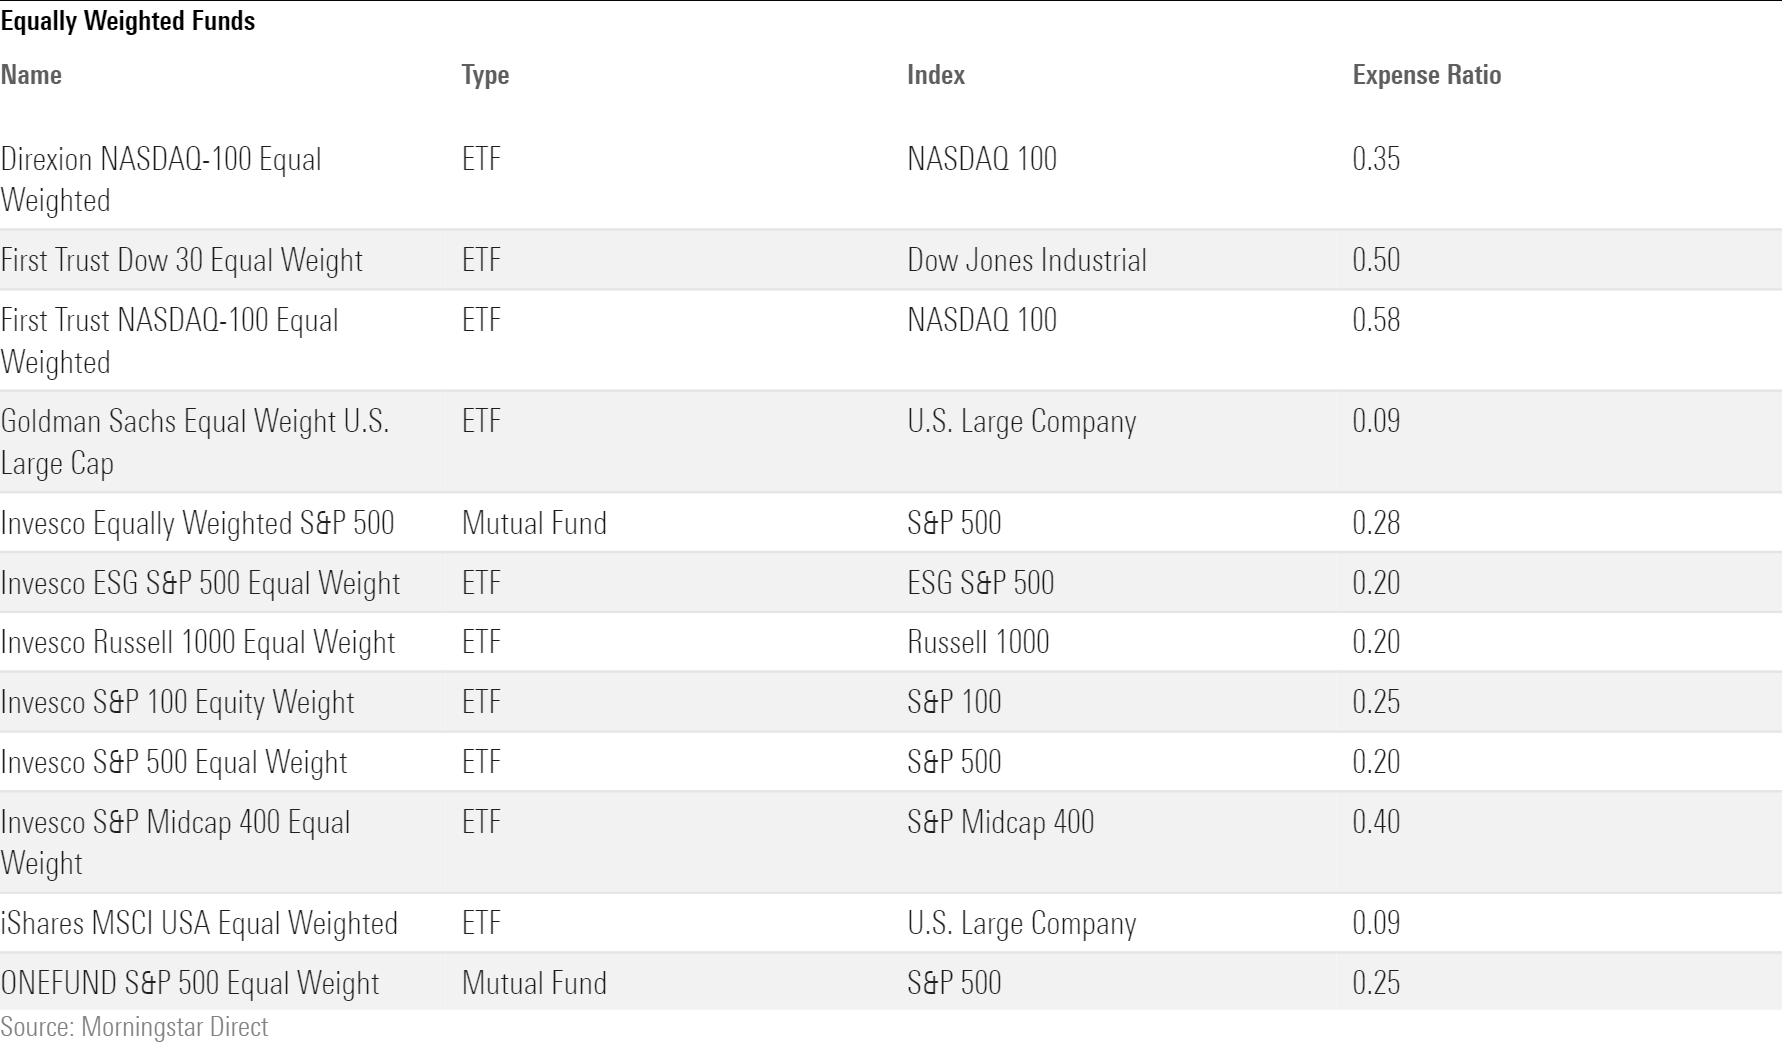 A table listing the 12 U.S. stocks that equally weight some portion of the entire market (as opposed to sectors). The table shows the name of each fund, its investment type, what index it equally weights, and its expense ratio.